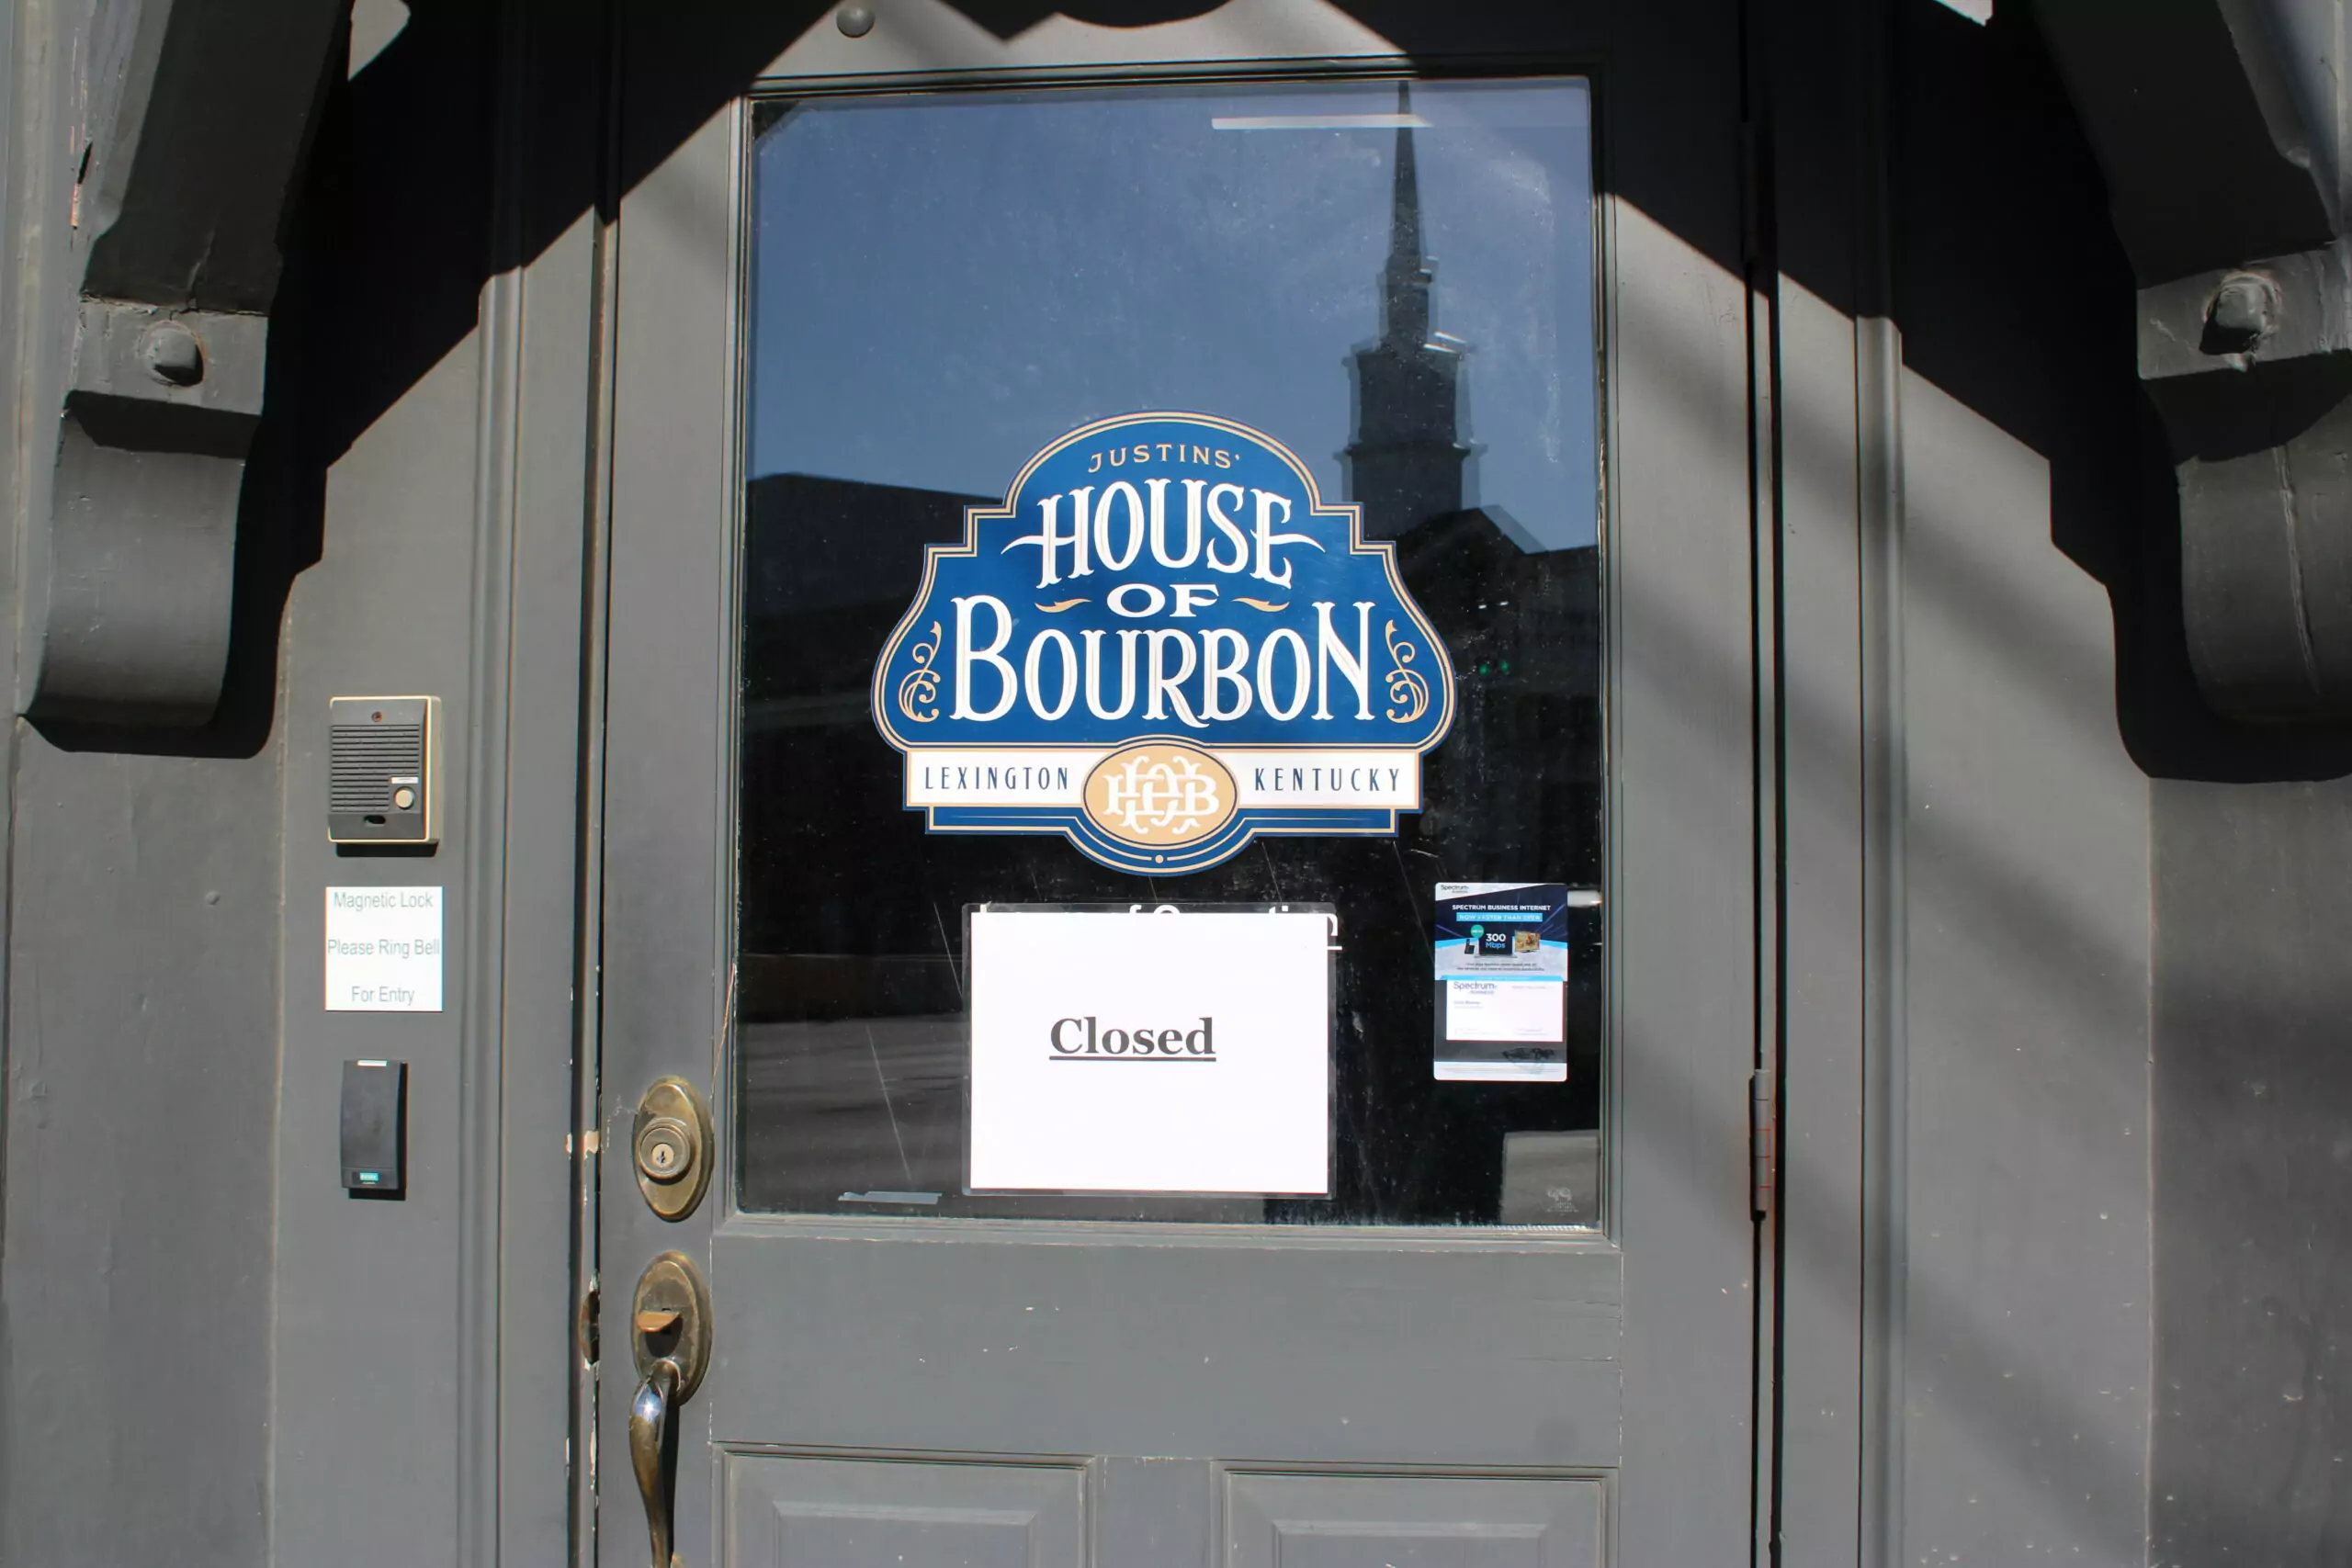 Justin's House of Bourbon closed Thursday after bottles seized in state ABC raid - store reopened Saturday